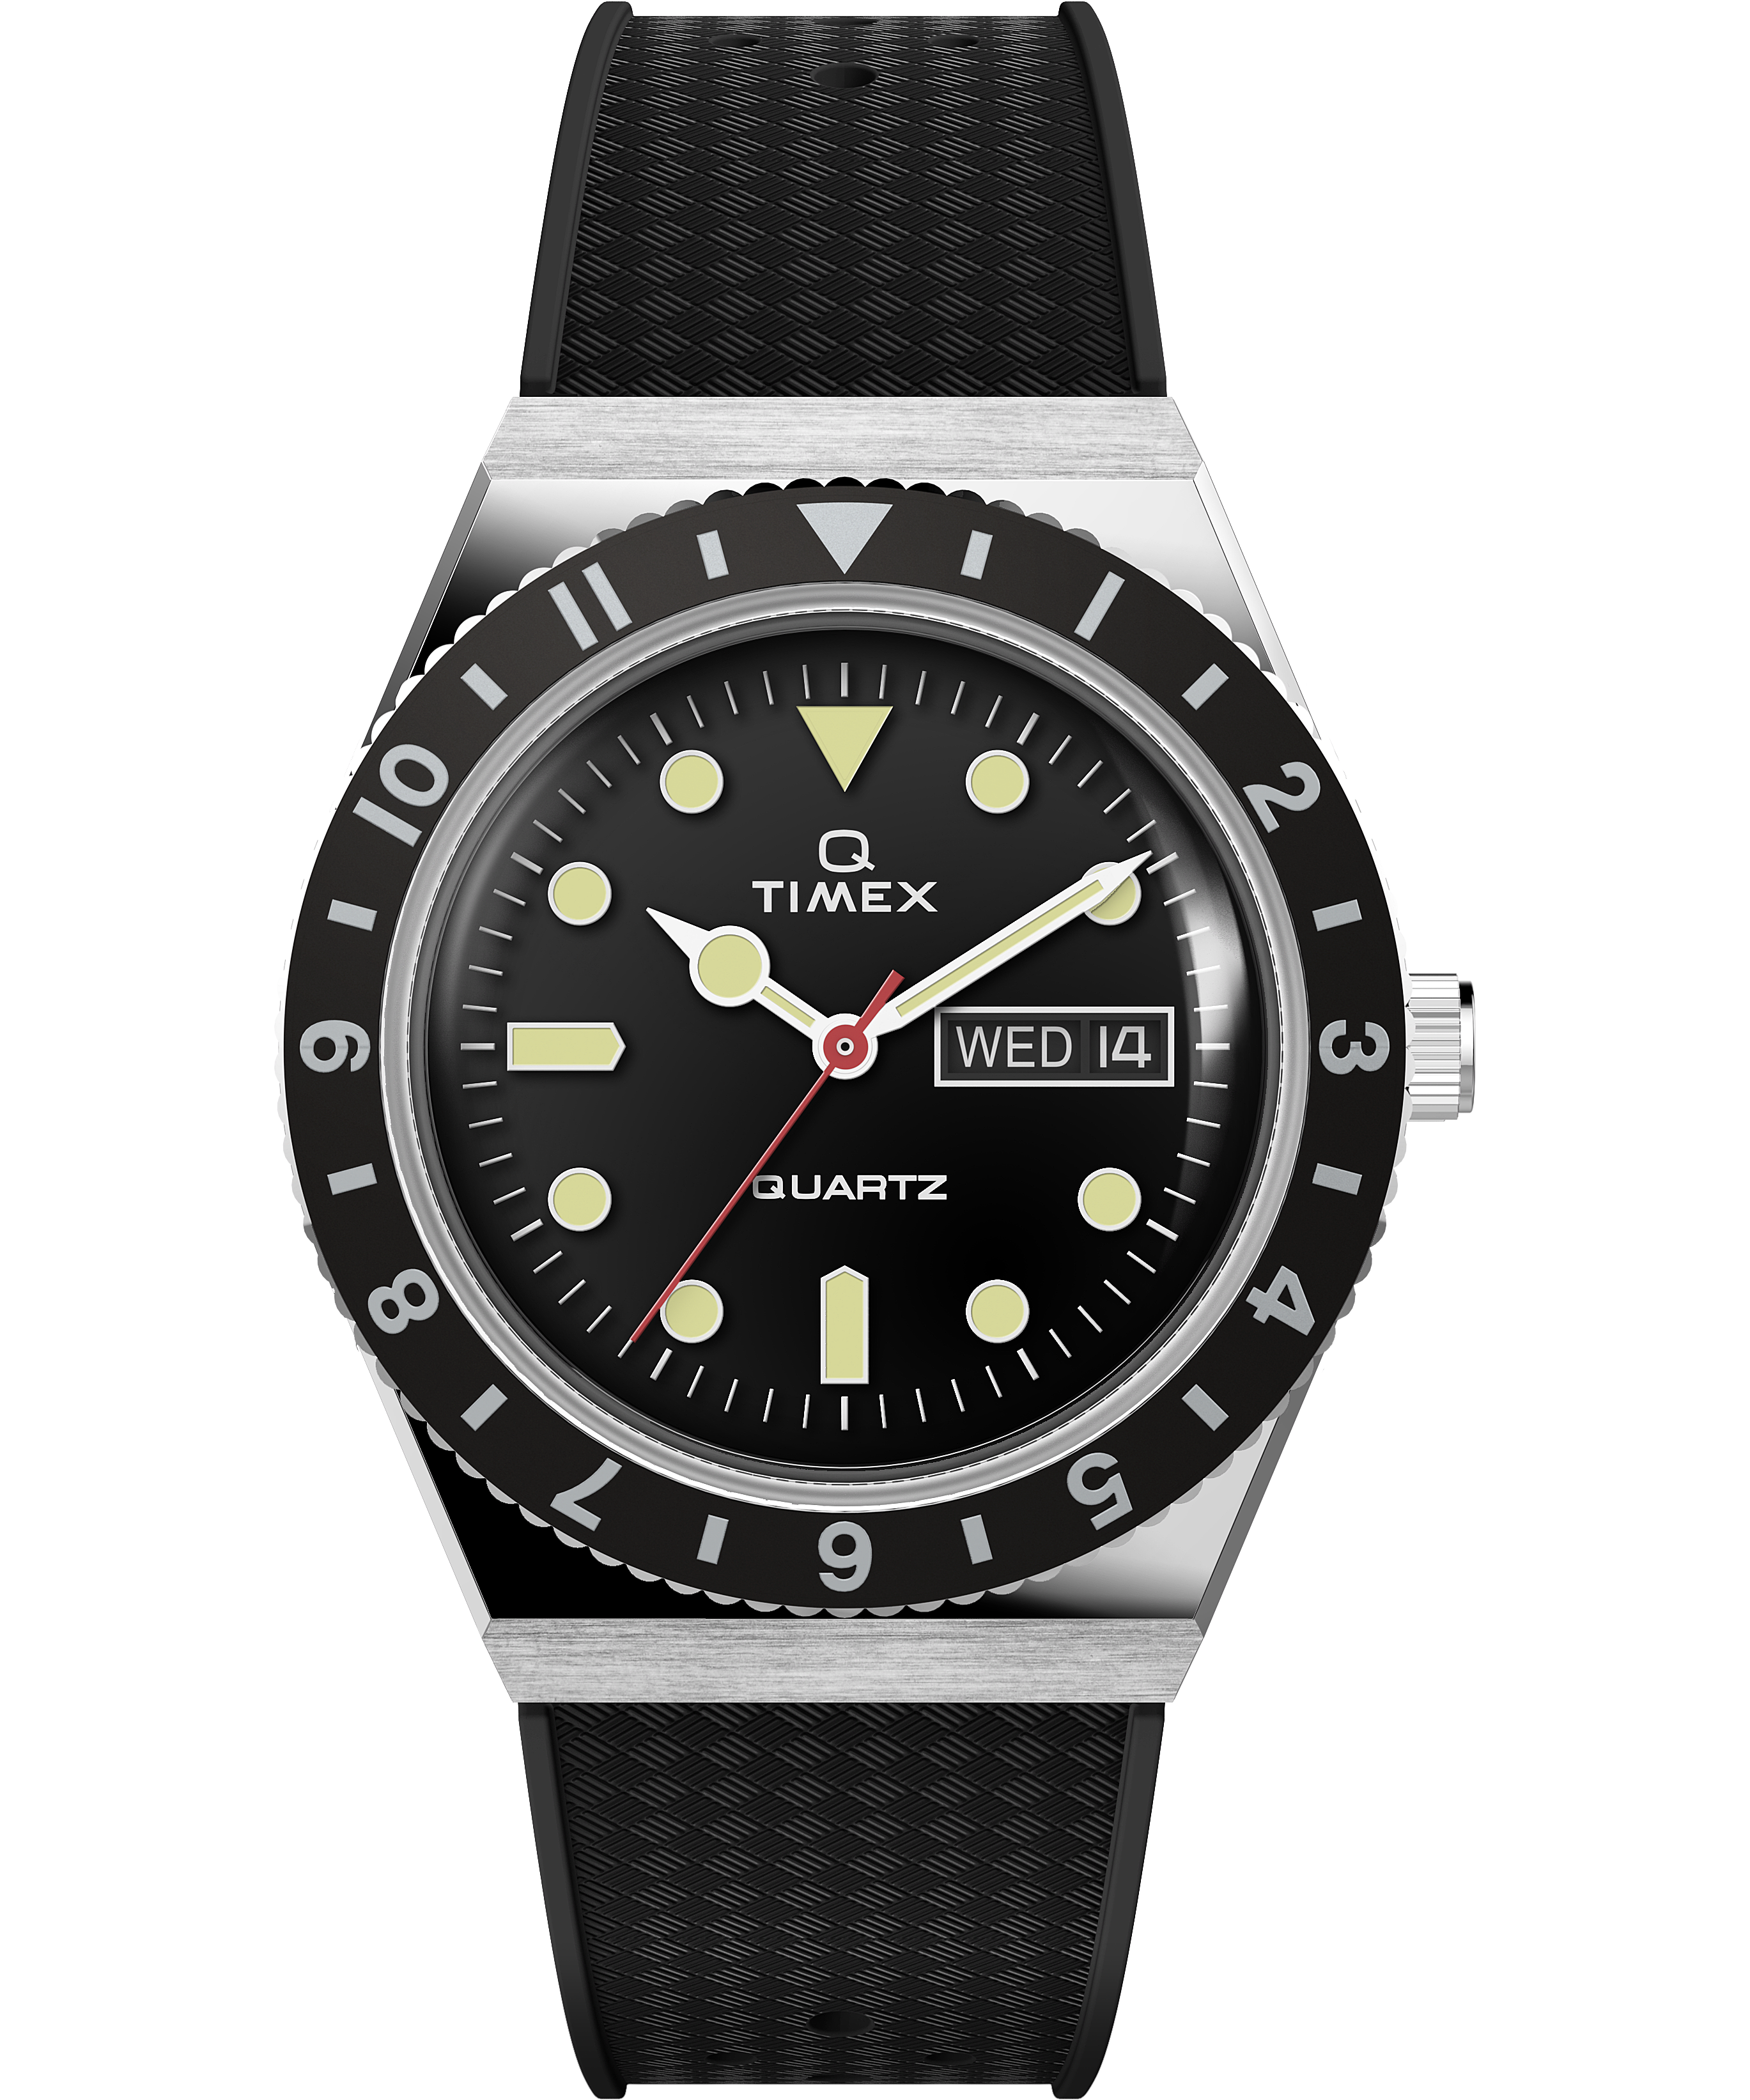 Q Timex 38mm Synthetic Rubber Strap Watch - Timex EU